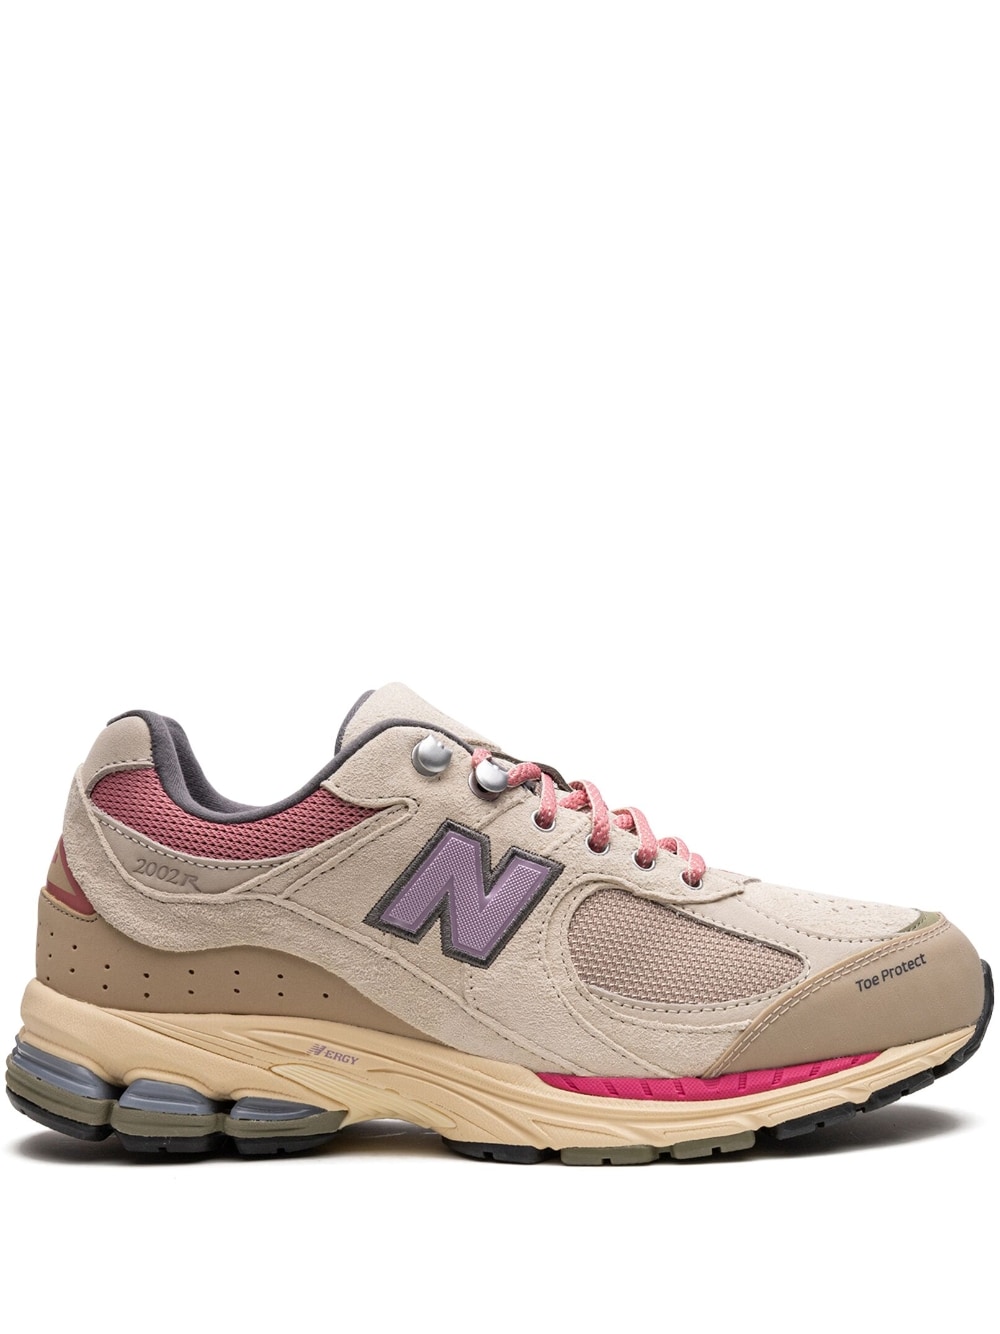 New Balance 2002R "Hiking Pack - Beige" sneakers - Neutrals